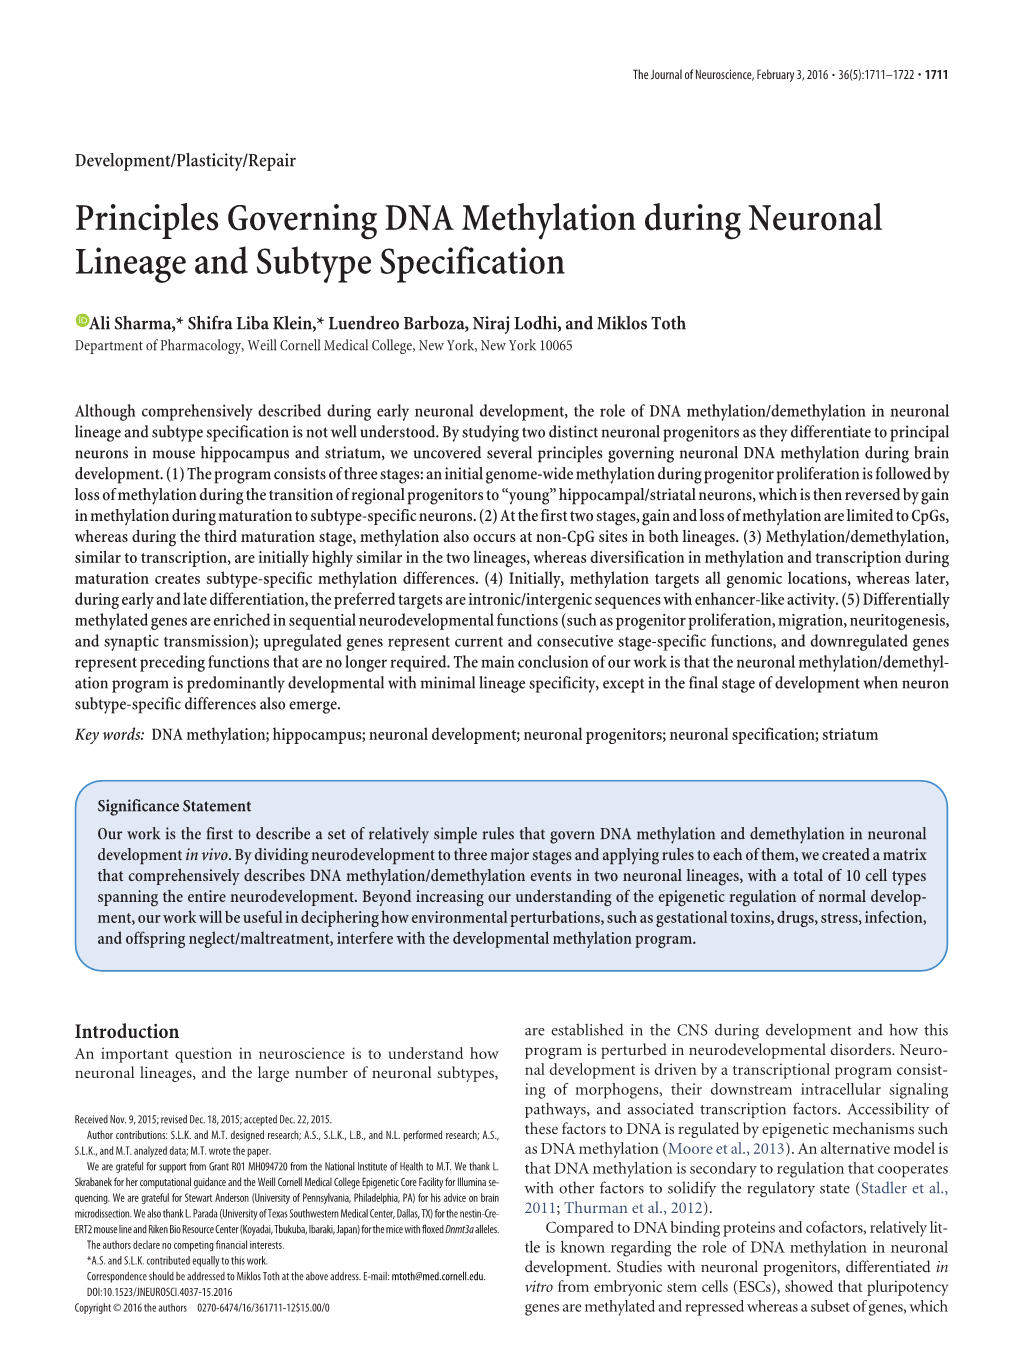 Principles Governing DNA Methylation During Neuronal Lineage and Subtype Specification